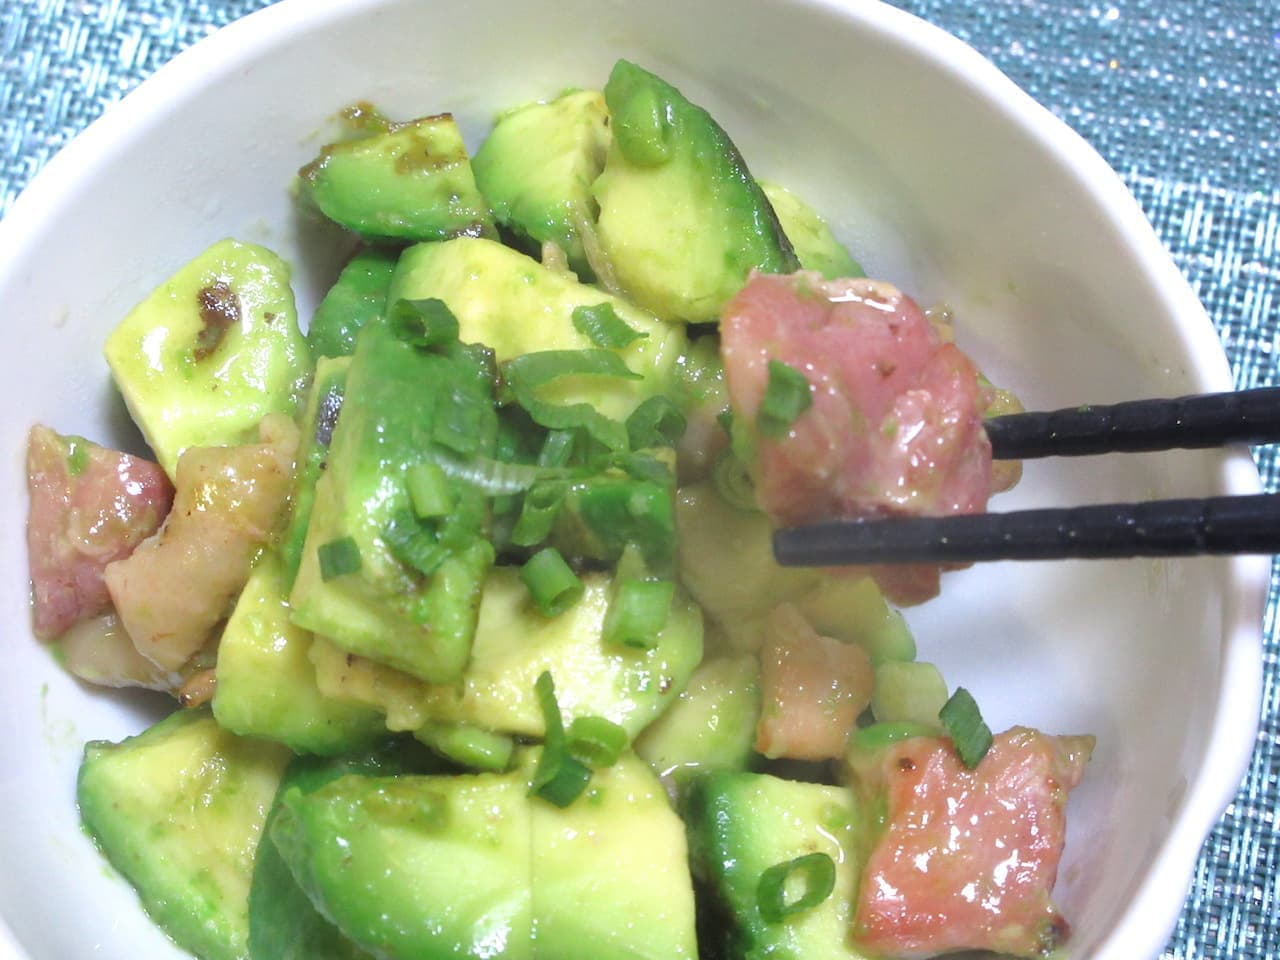 Simple recipe: "Stir-fried canned grilled chicken with avocado.